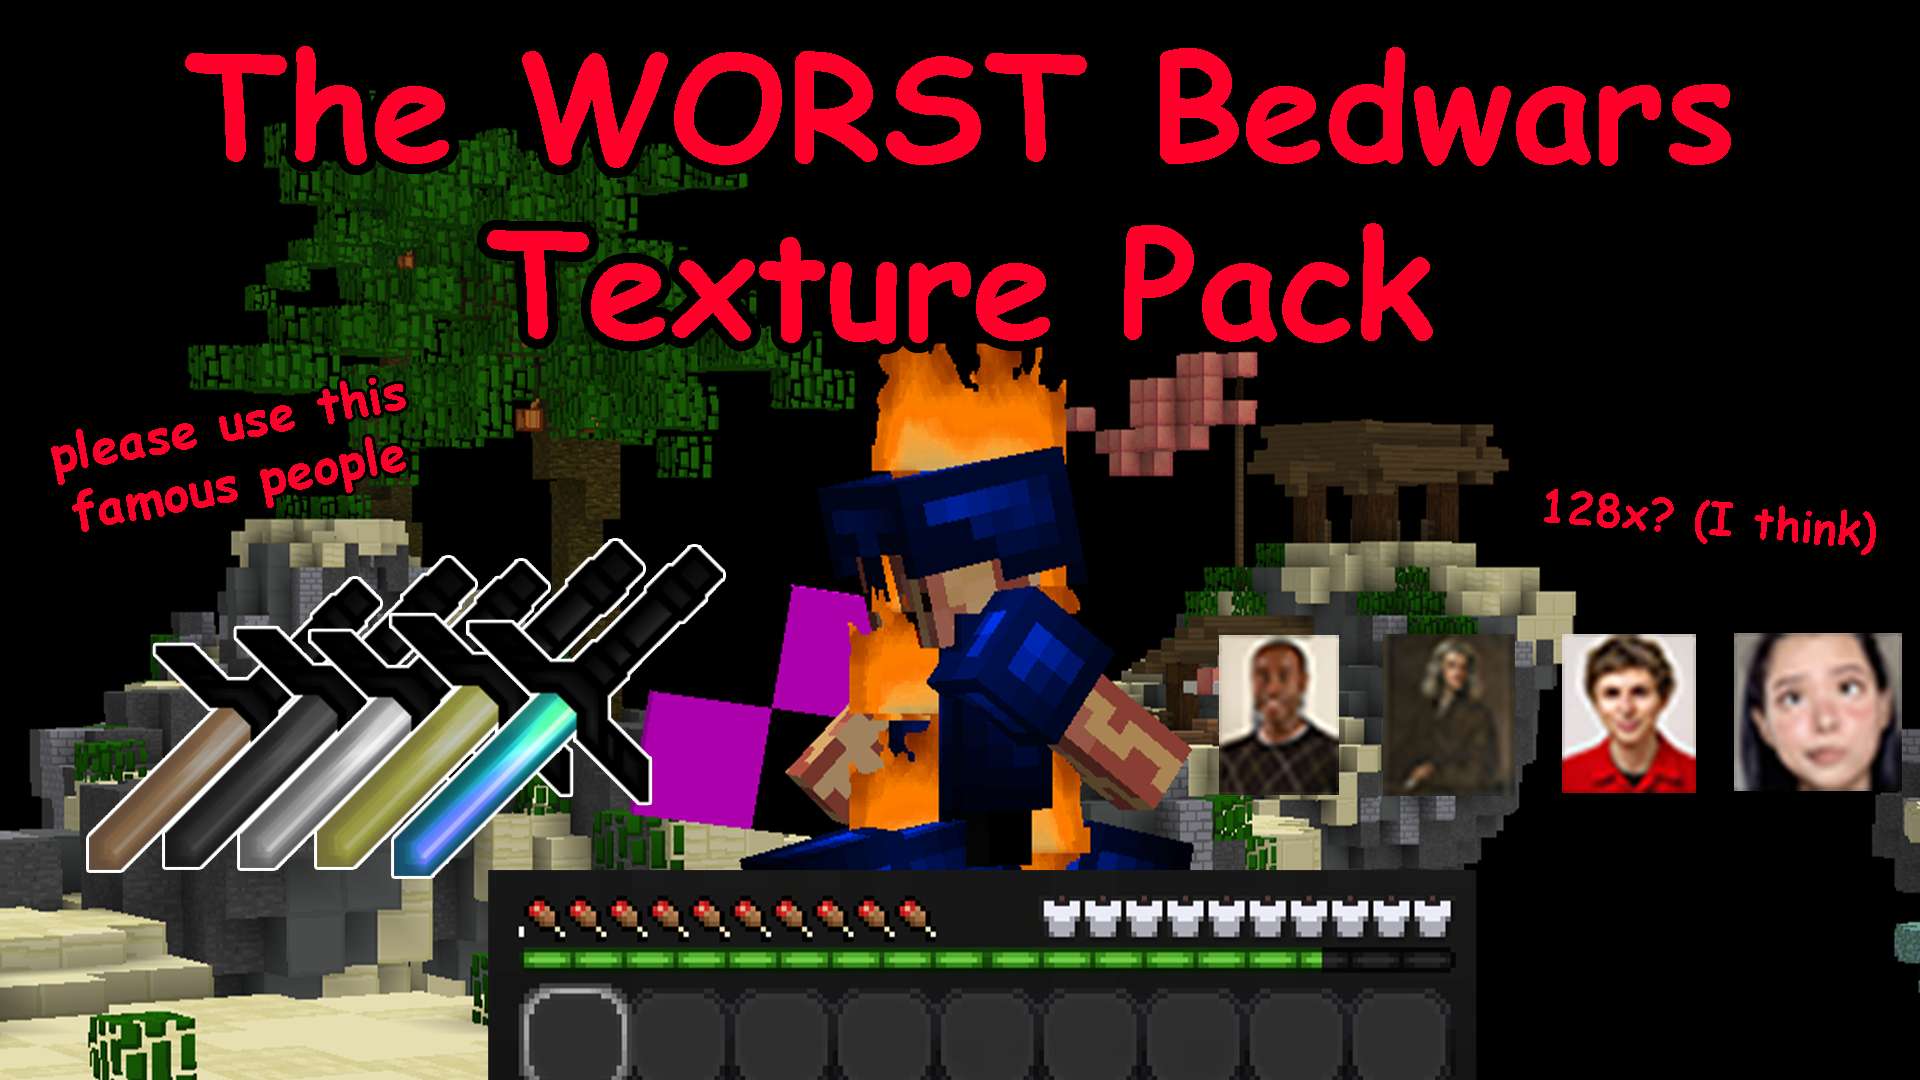 The Worst Bedwars Texture Pack 128x by baconnwaffles0 on PvPRP